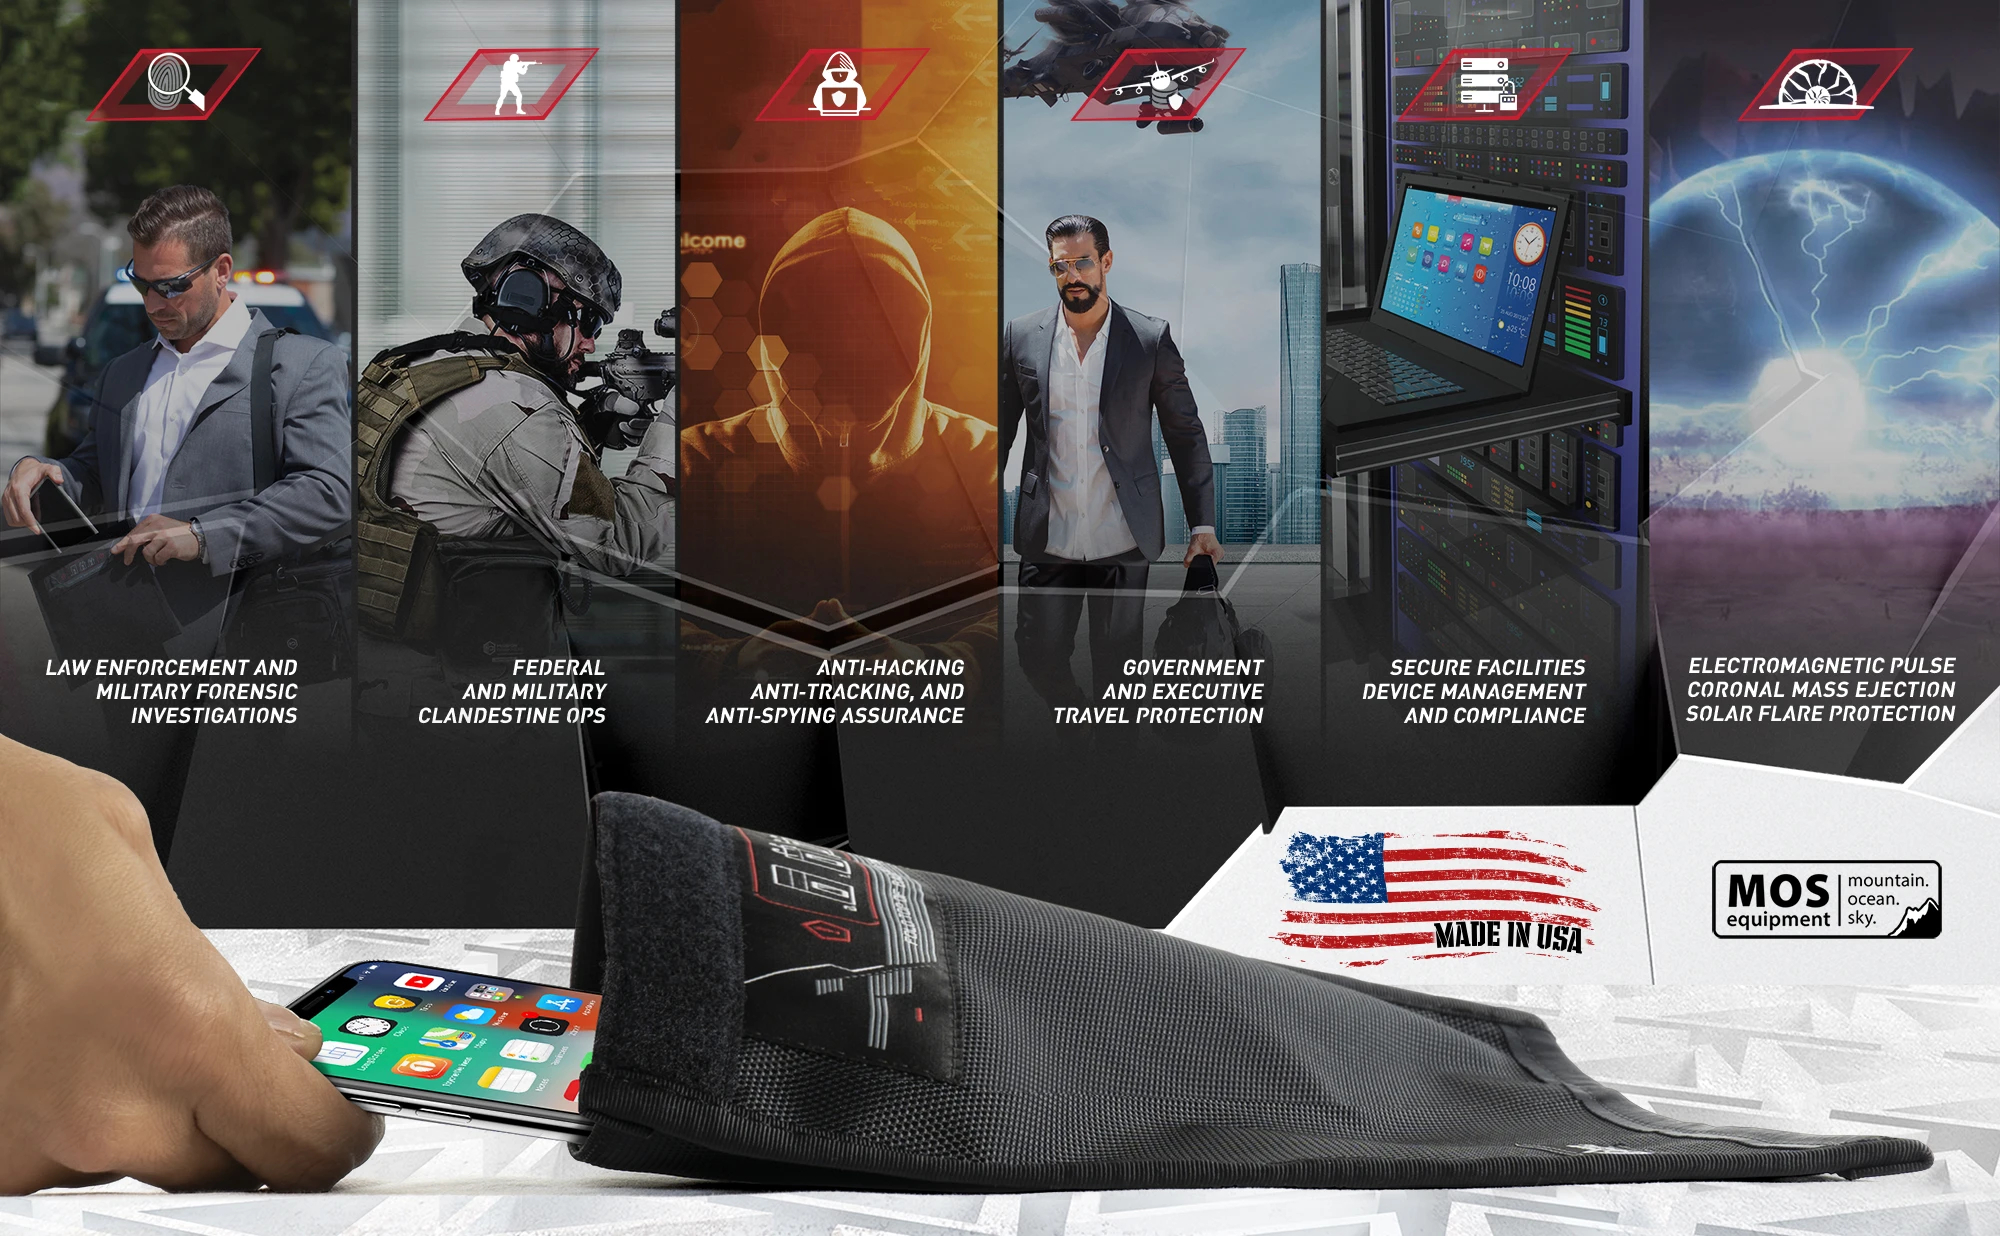 Mission Darkness™ Non-Window Faraday Bag for Phones